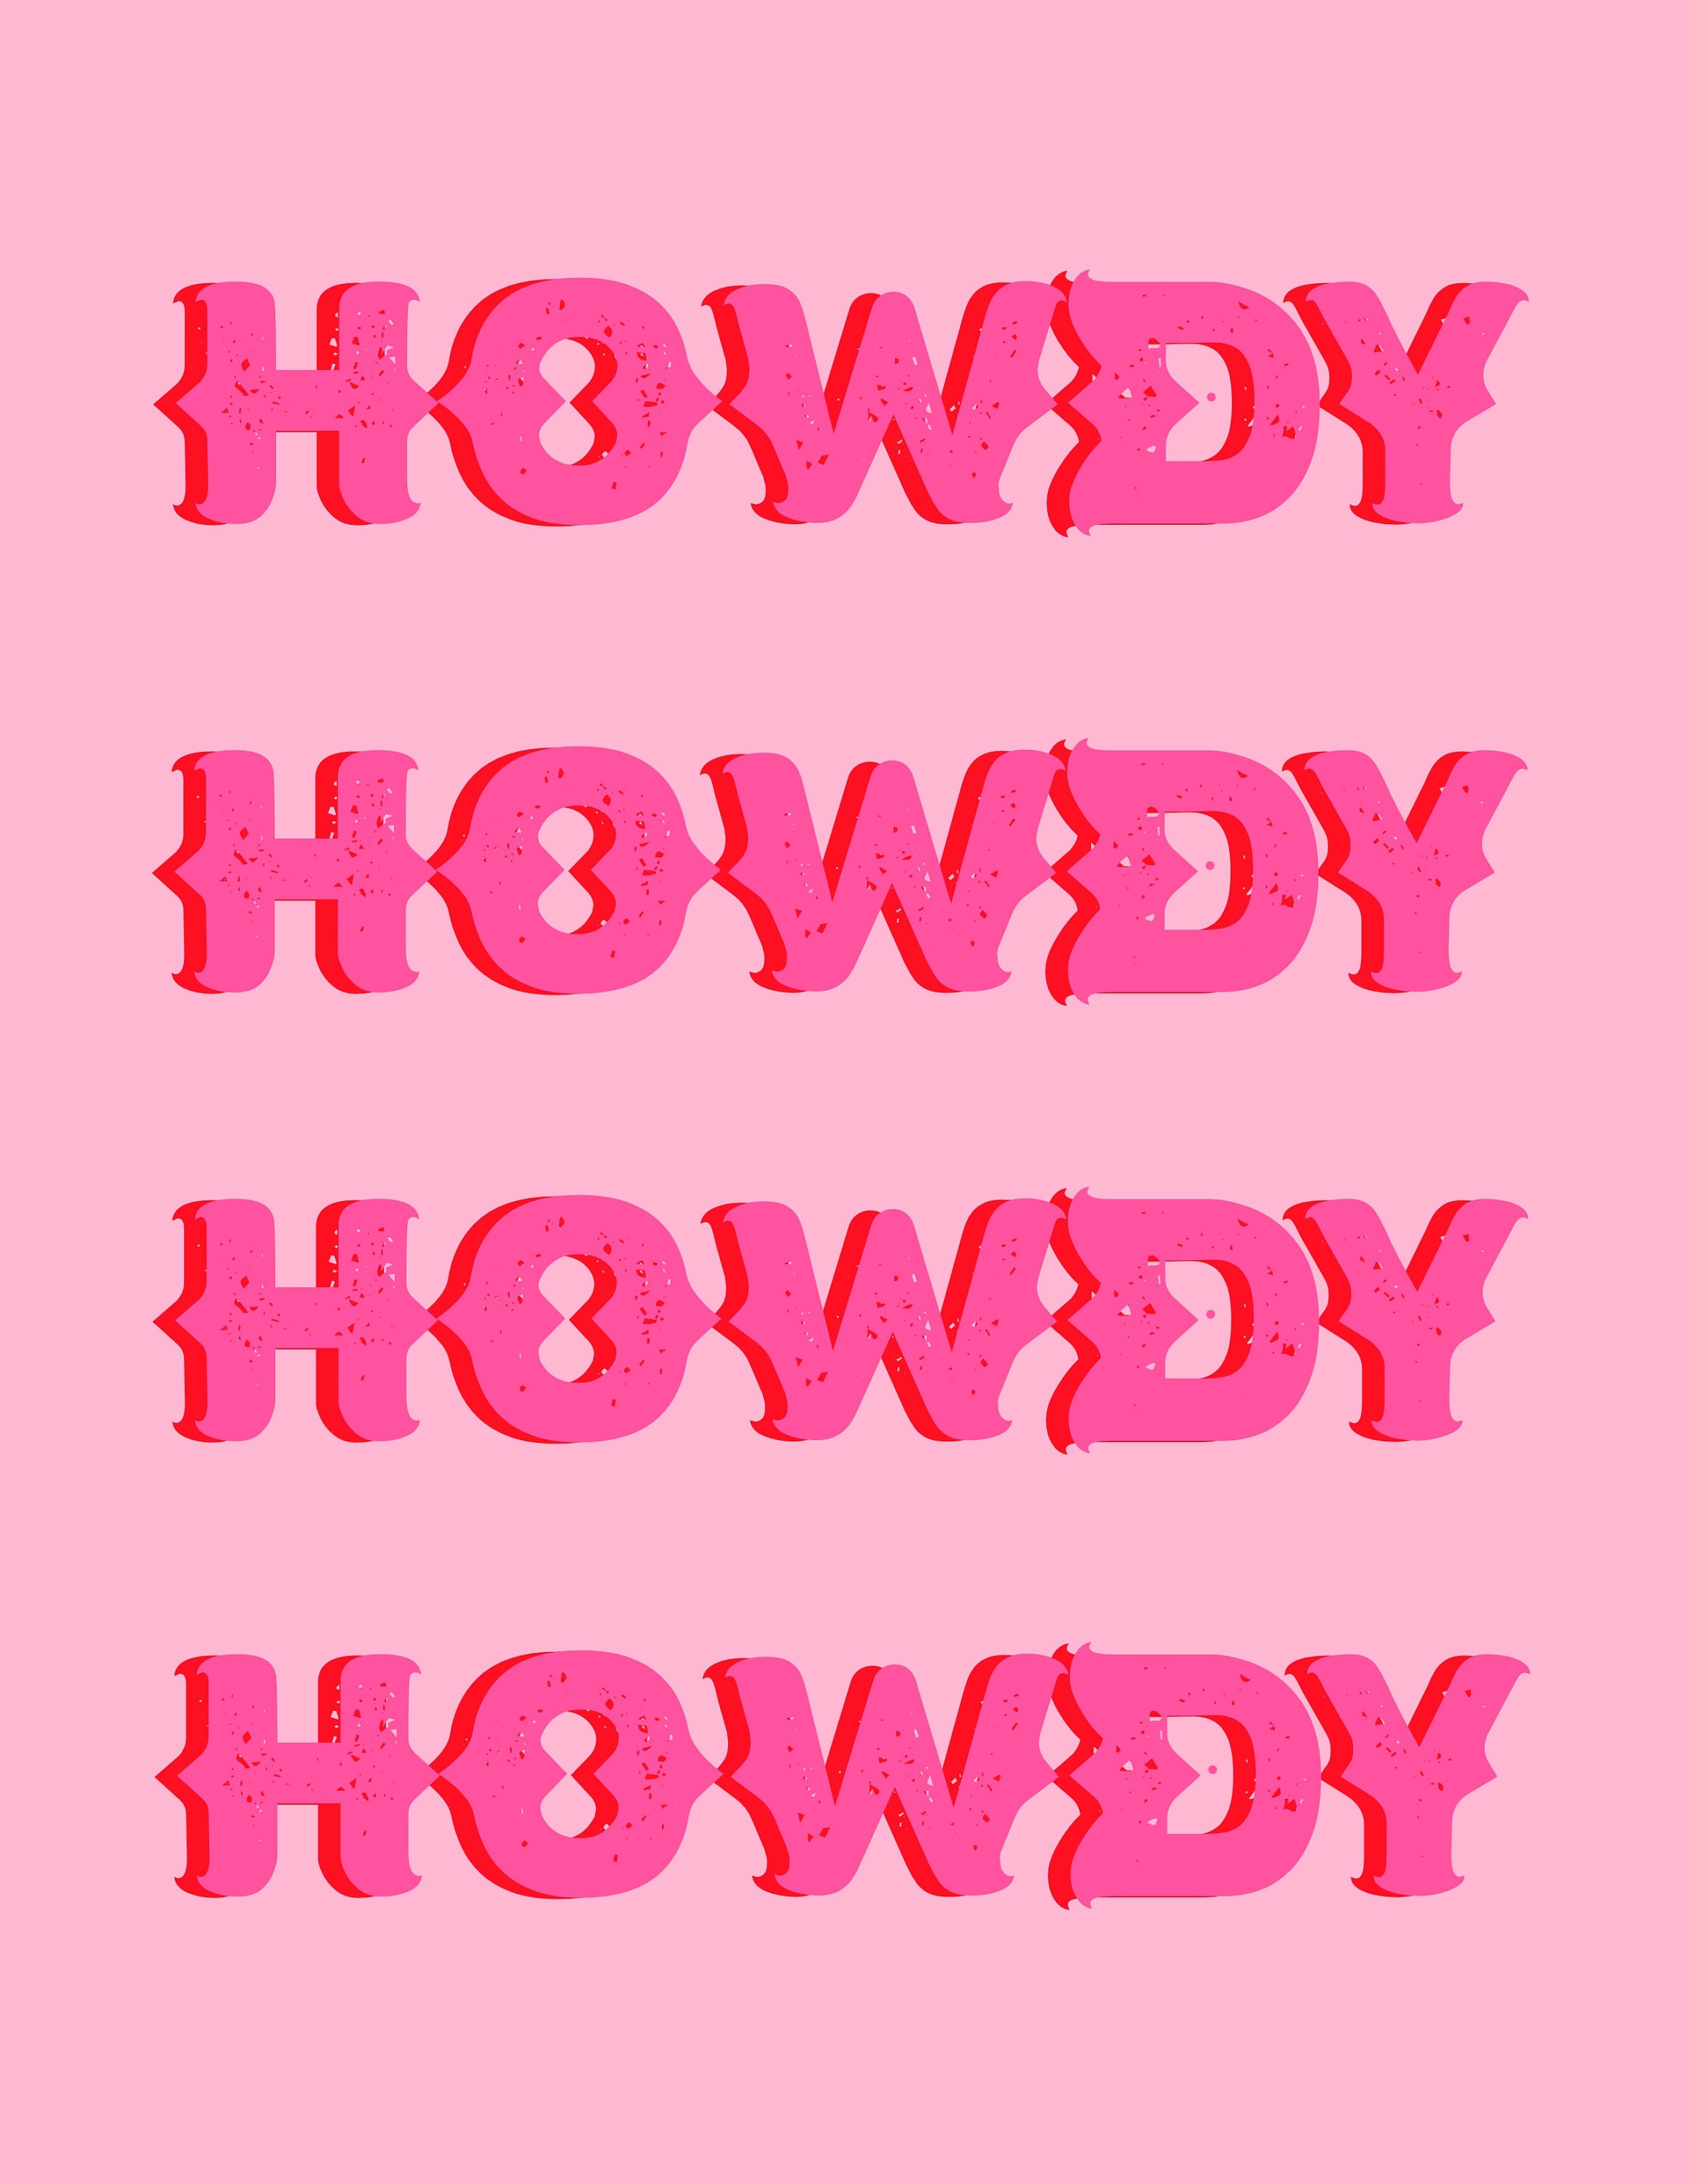 Howdy Pink Wall Art Digital Download Instant Graphic Pink